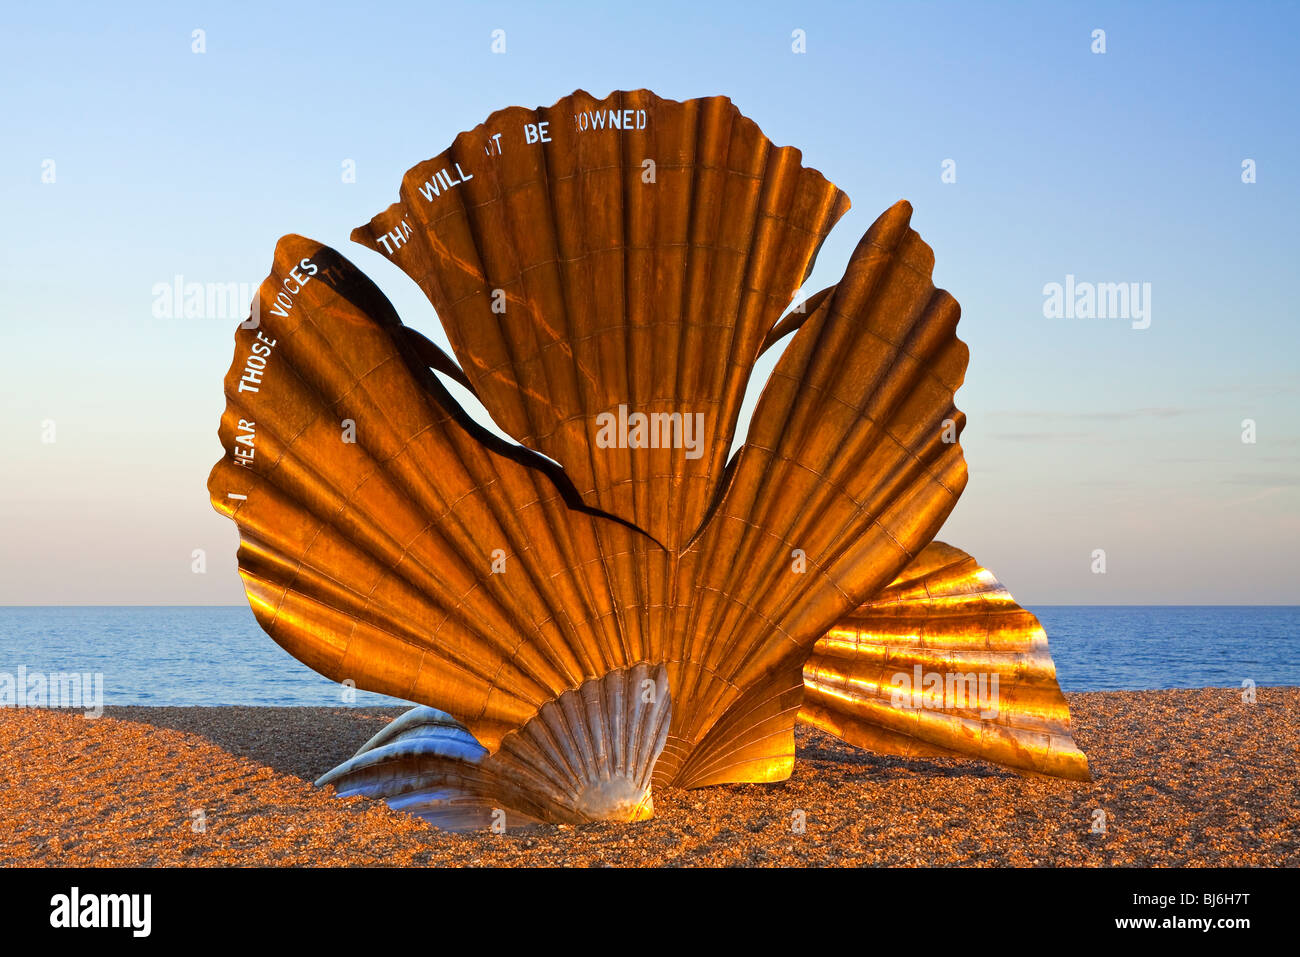 The Scallop sculpture on Aldeburgh beach Suffolk UK by Maggi Hamblin dedicated to composer Benjamin Britten and created in 2003 Stock Photo